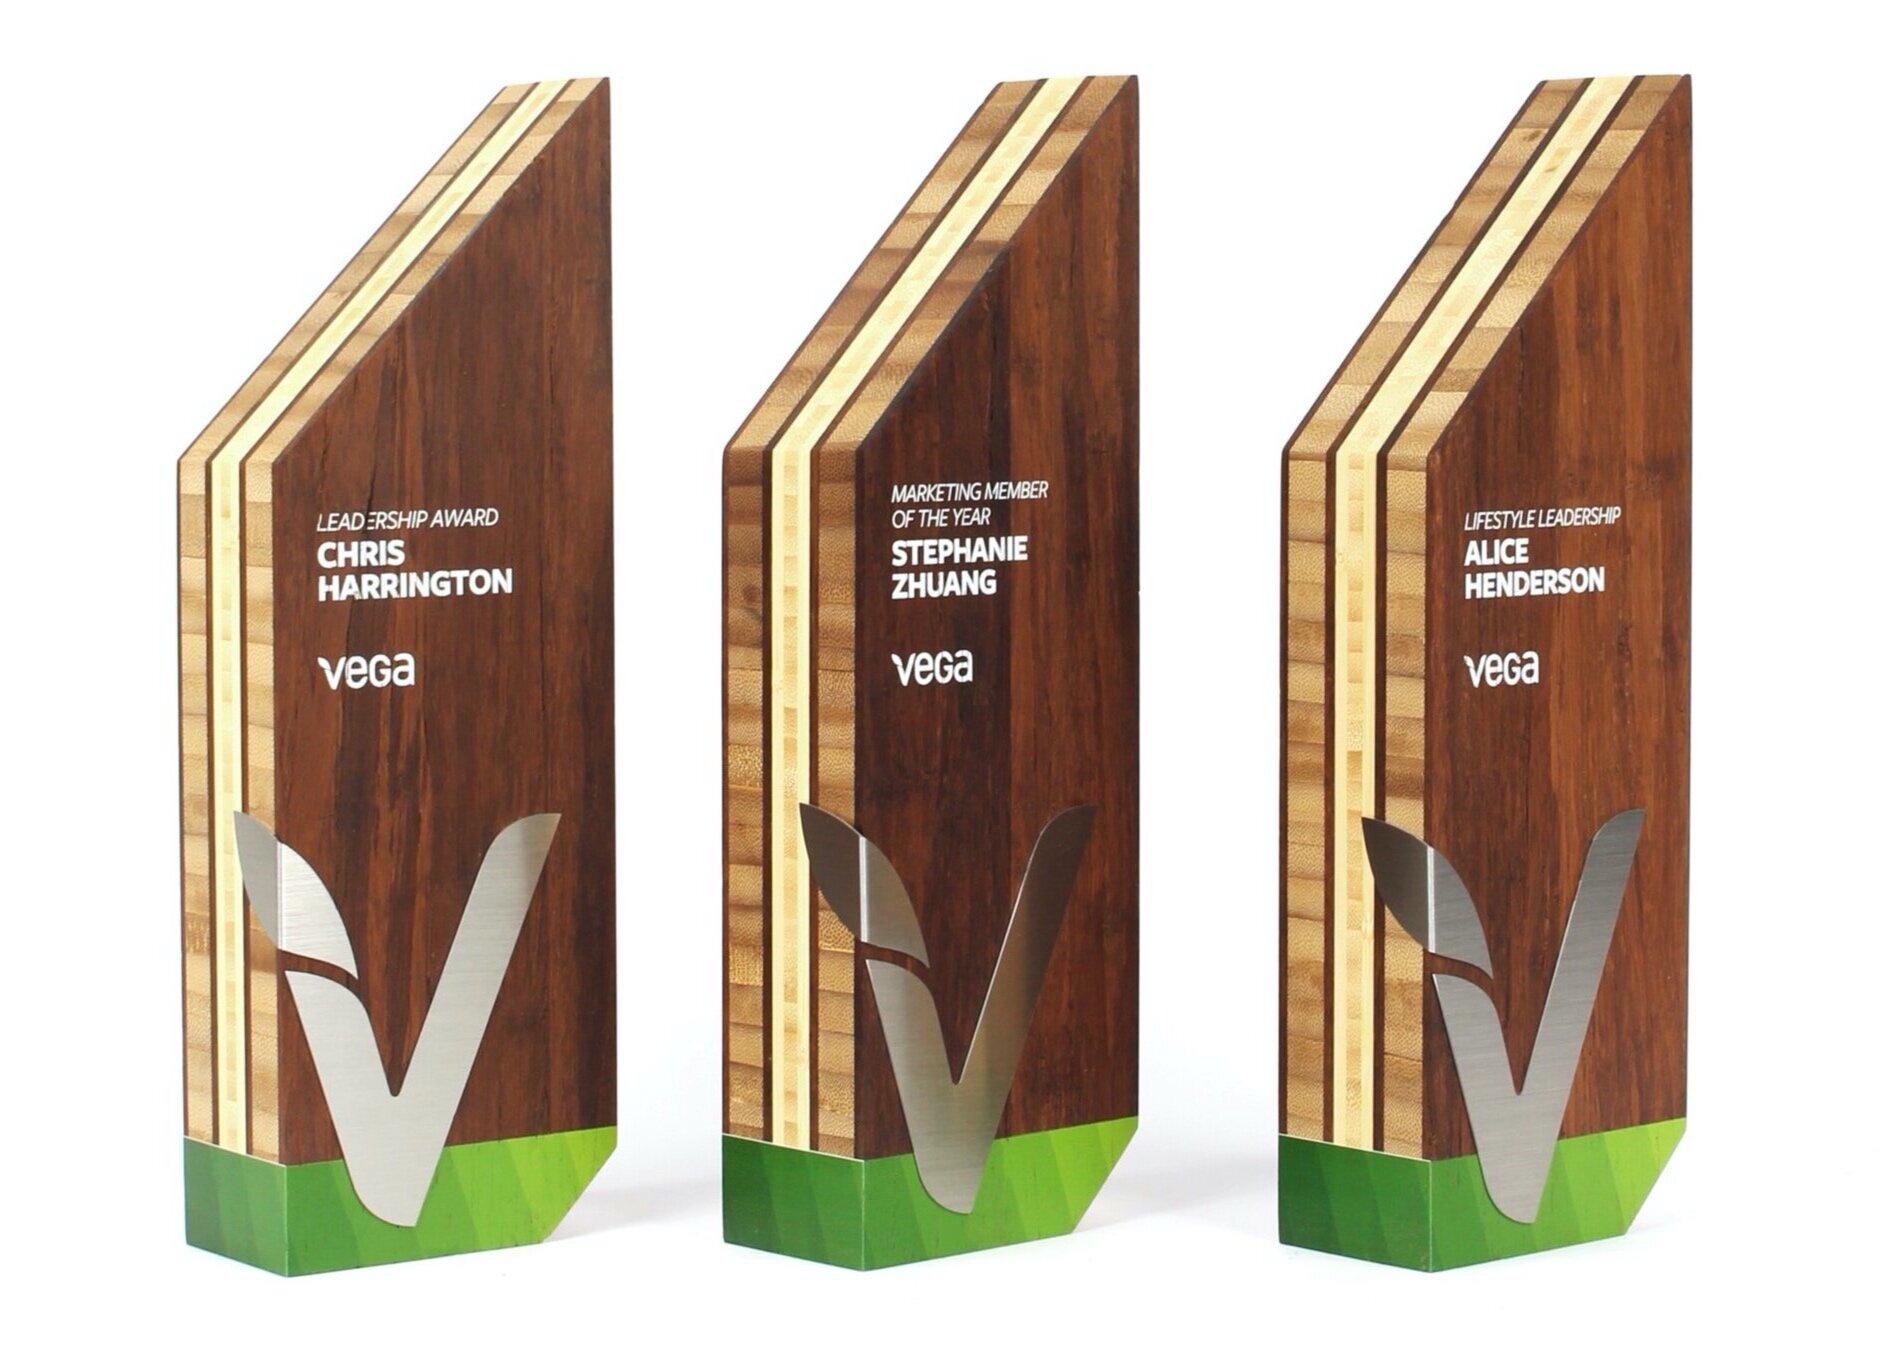 VEGA custom marketing and leadership awards for a corporate event conference bamboo sustainable awards